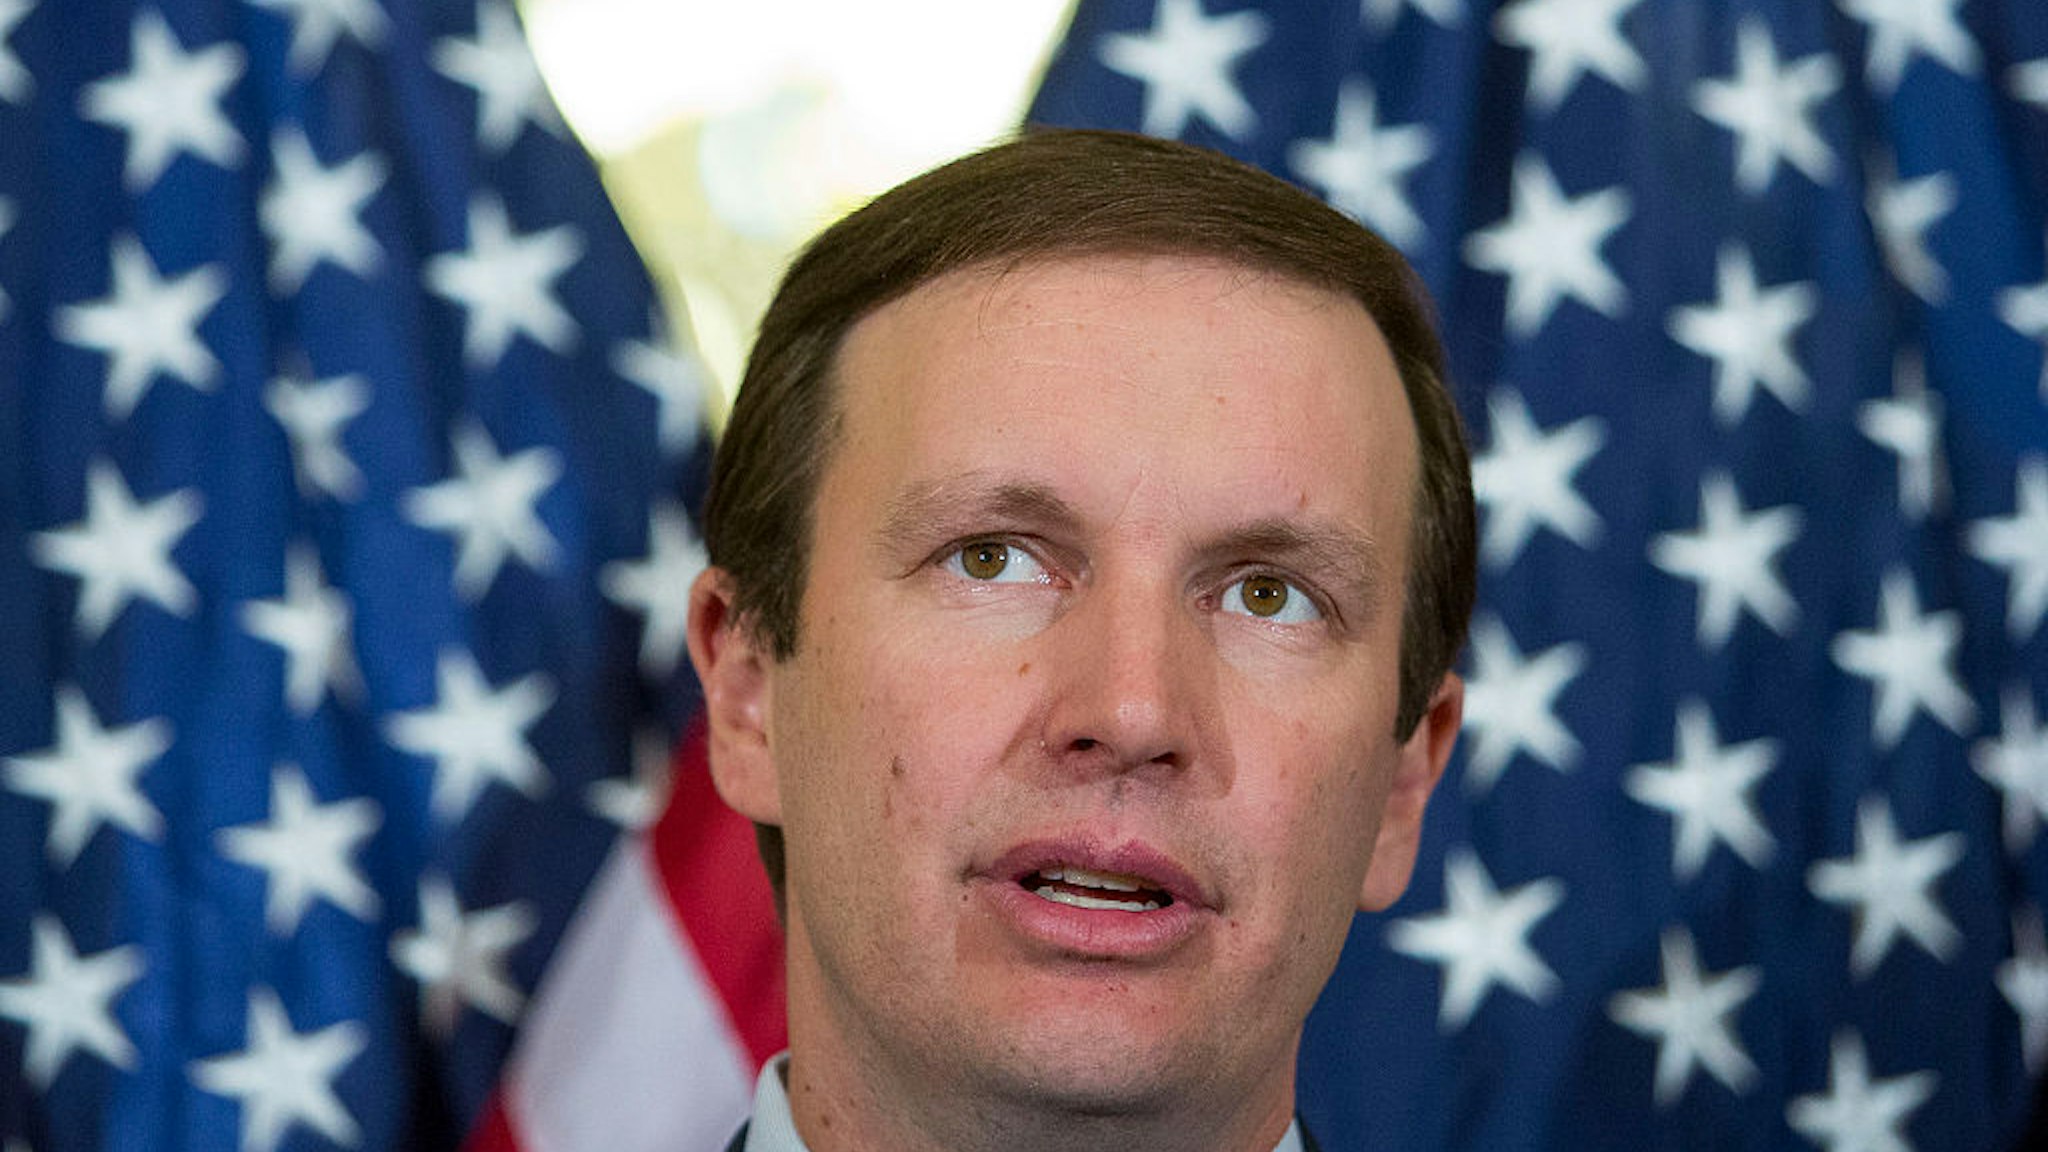 WASHINGTON, DC - MARCH 4: Sen. Chris Murphy (D-CT) speaks at a news conference to discuss the Affordable Care Act case being heard at the Supreme Court, March 4, 2015 on Capitol Hill in Washington, DC. Today the Supreme Court was scheduled to hear oral arguments in the case of King v. Burwell that could determine the fate of health care subsidies for as many as eight million people.